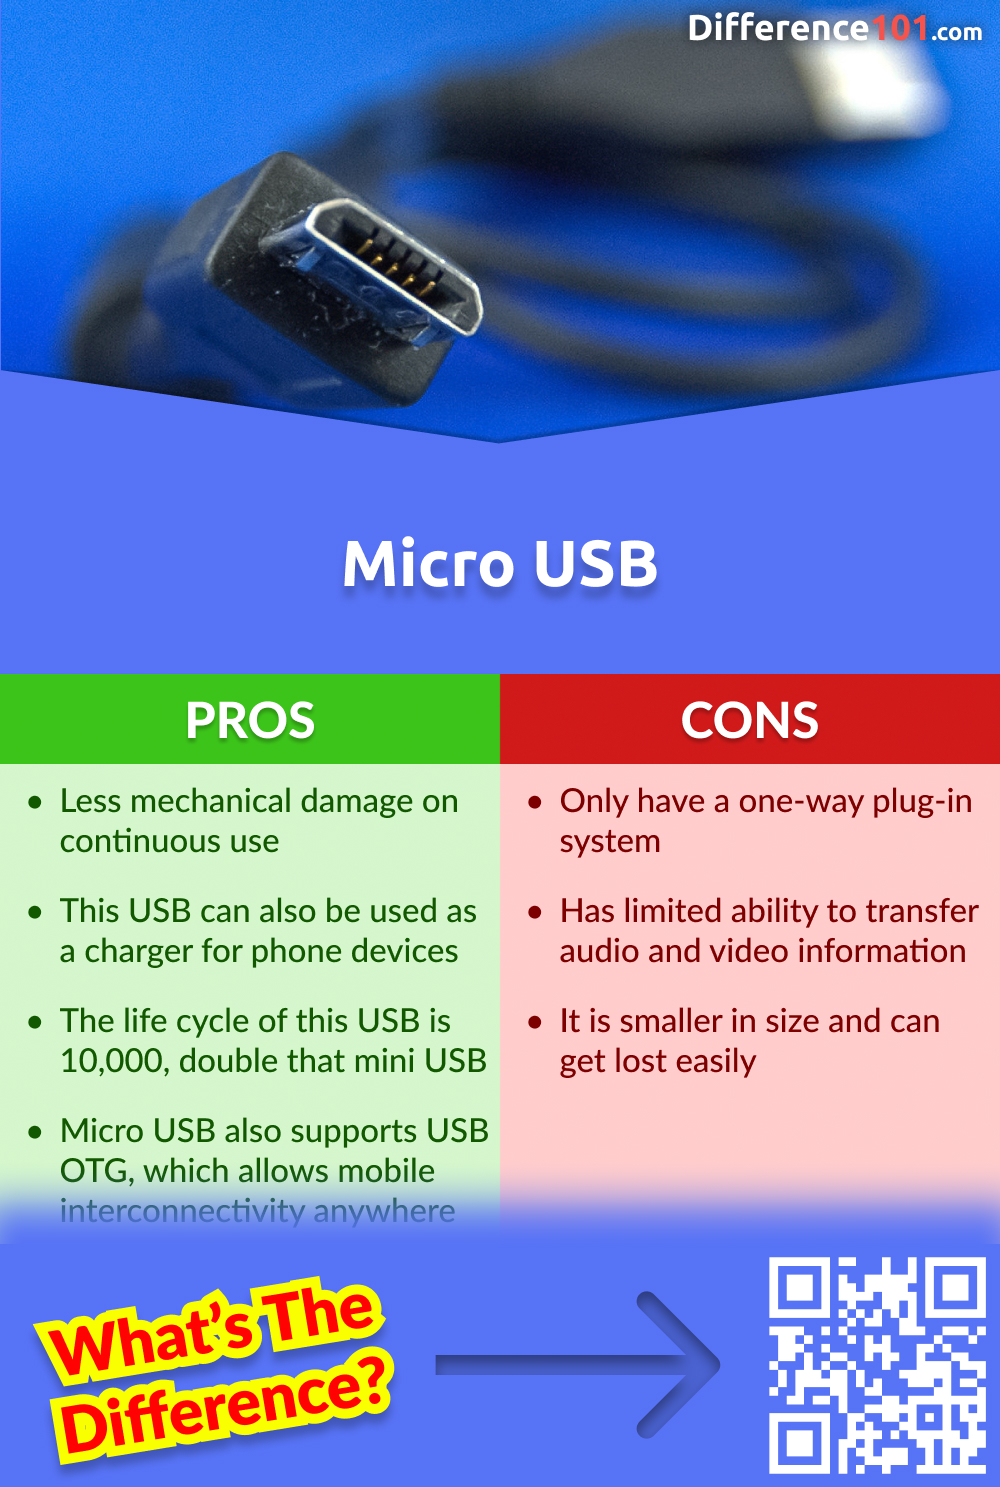 Pros and cons of Micro USB